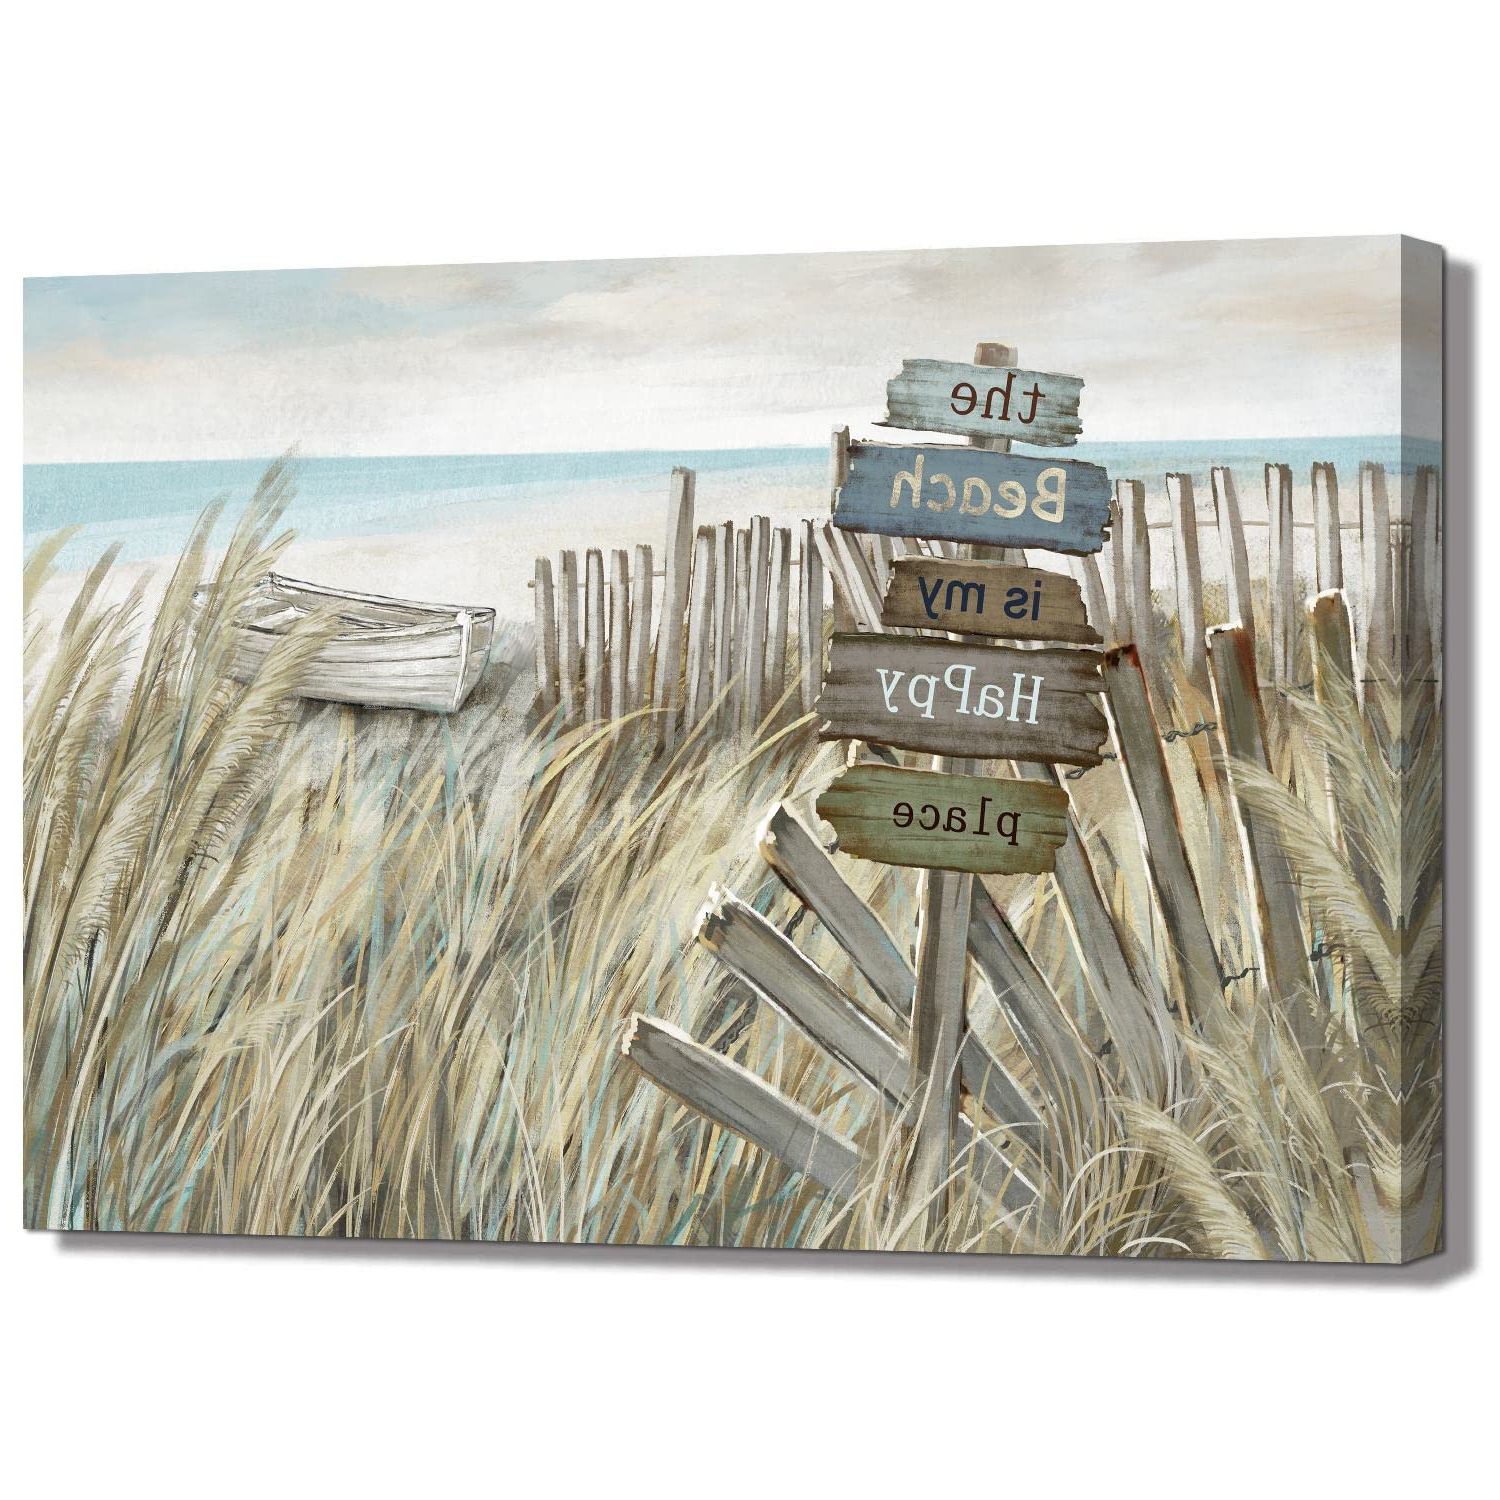 2018 Amazon: Canvas Wall Art With Fence Beach Seascape Painting Prints  Modern Pictures Decor For Bedroom Bathroom Living Room Home Office  (beach 2, 16"x24"): Posters & Prints Inside Bathroom Bedroom Fence Wall Art (Photo 1 of 15)